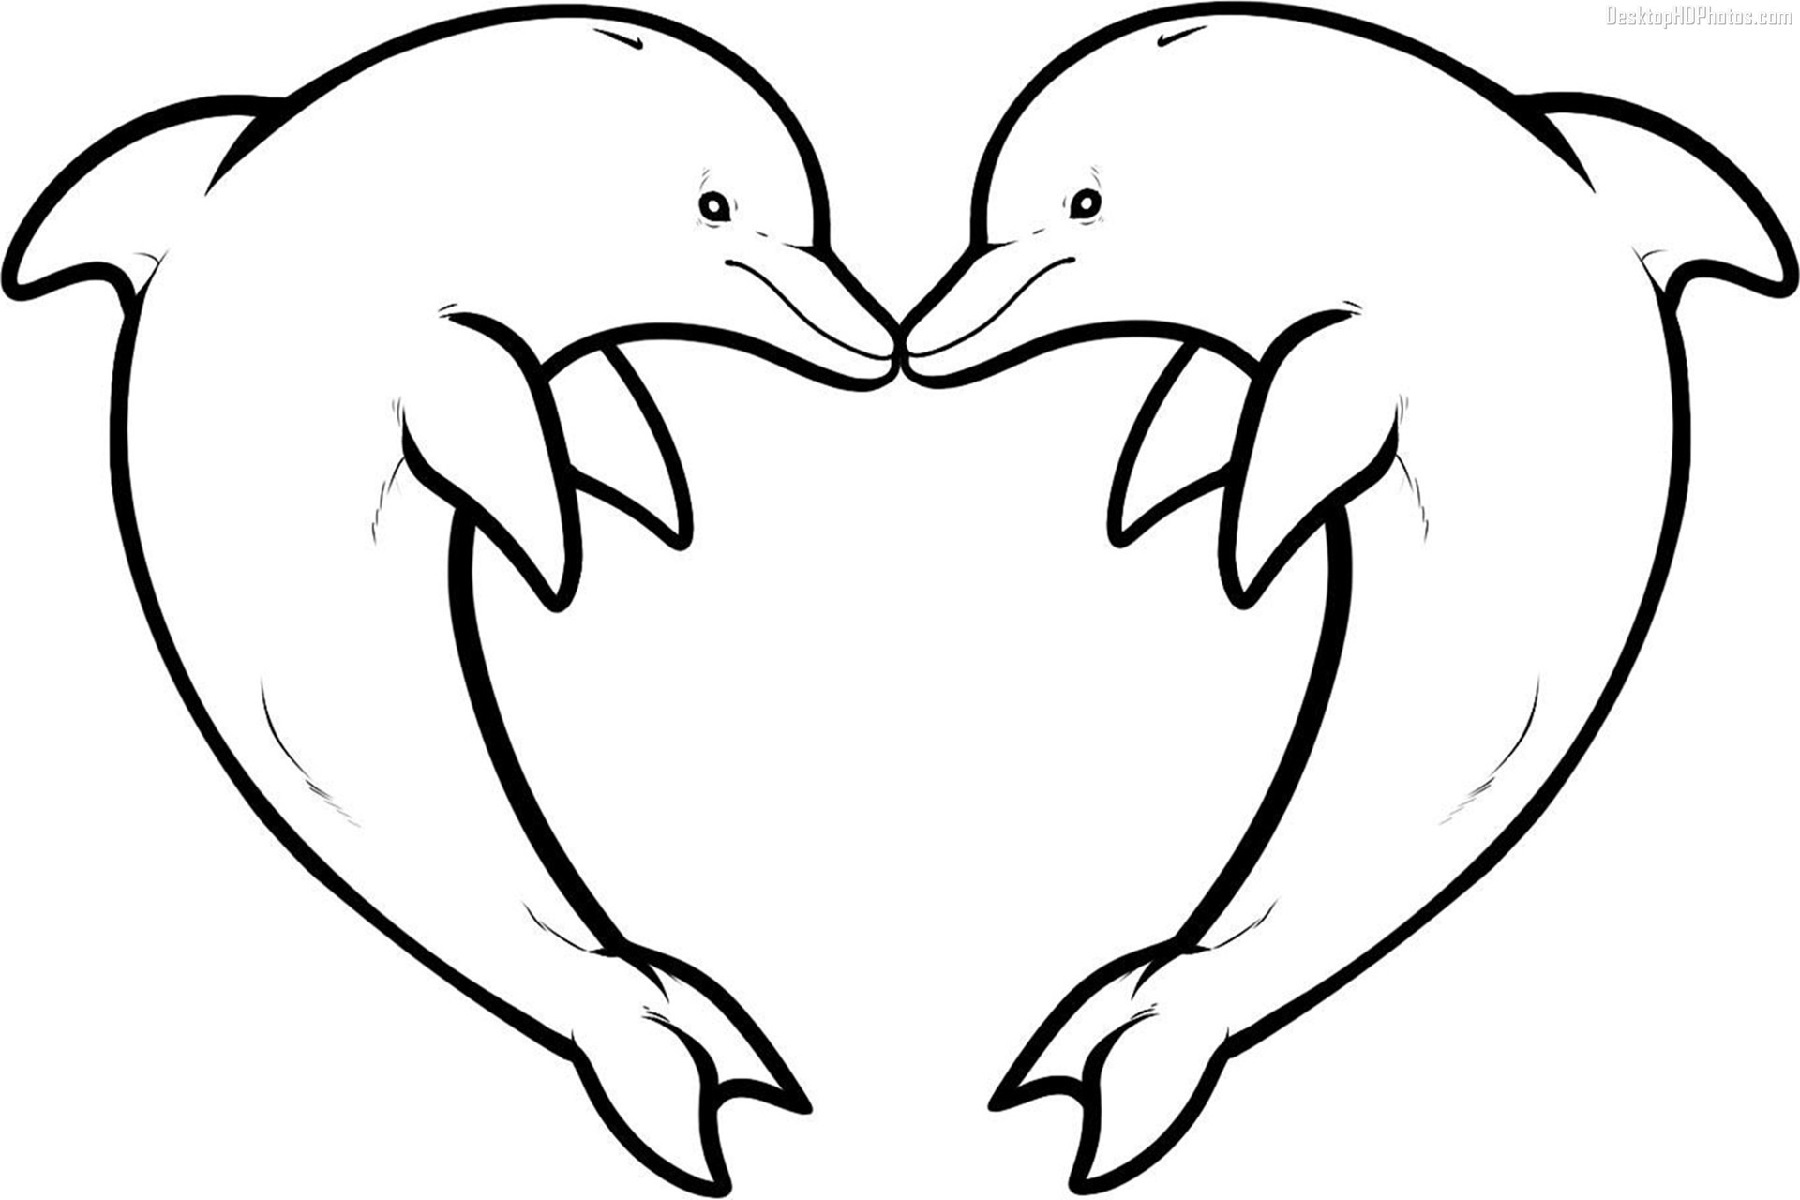 Dolphin Coloring Pages For Kids | Educative Printable - Dolphin Coloring Sheets Free Printable